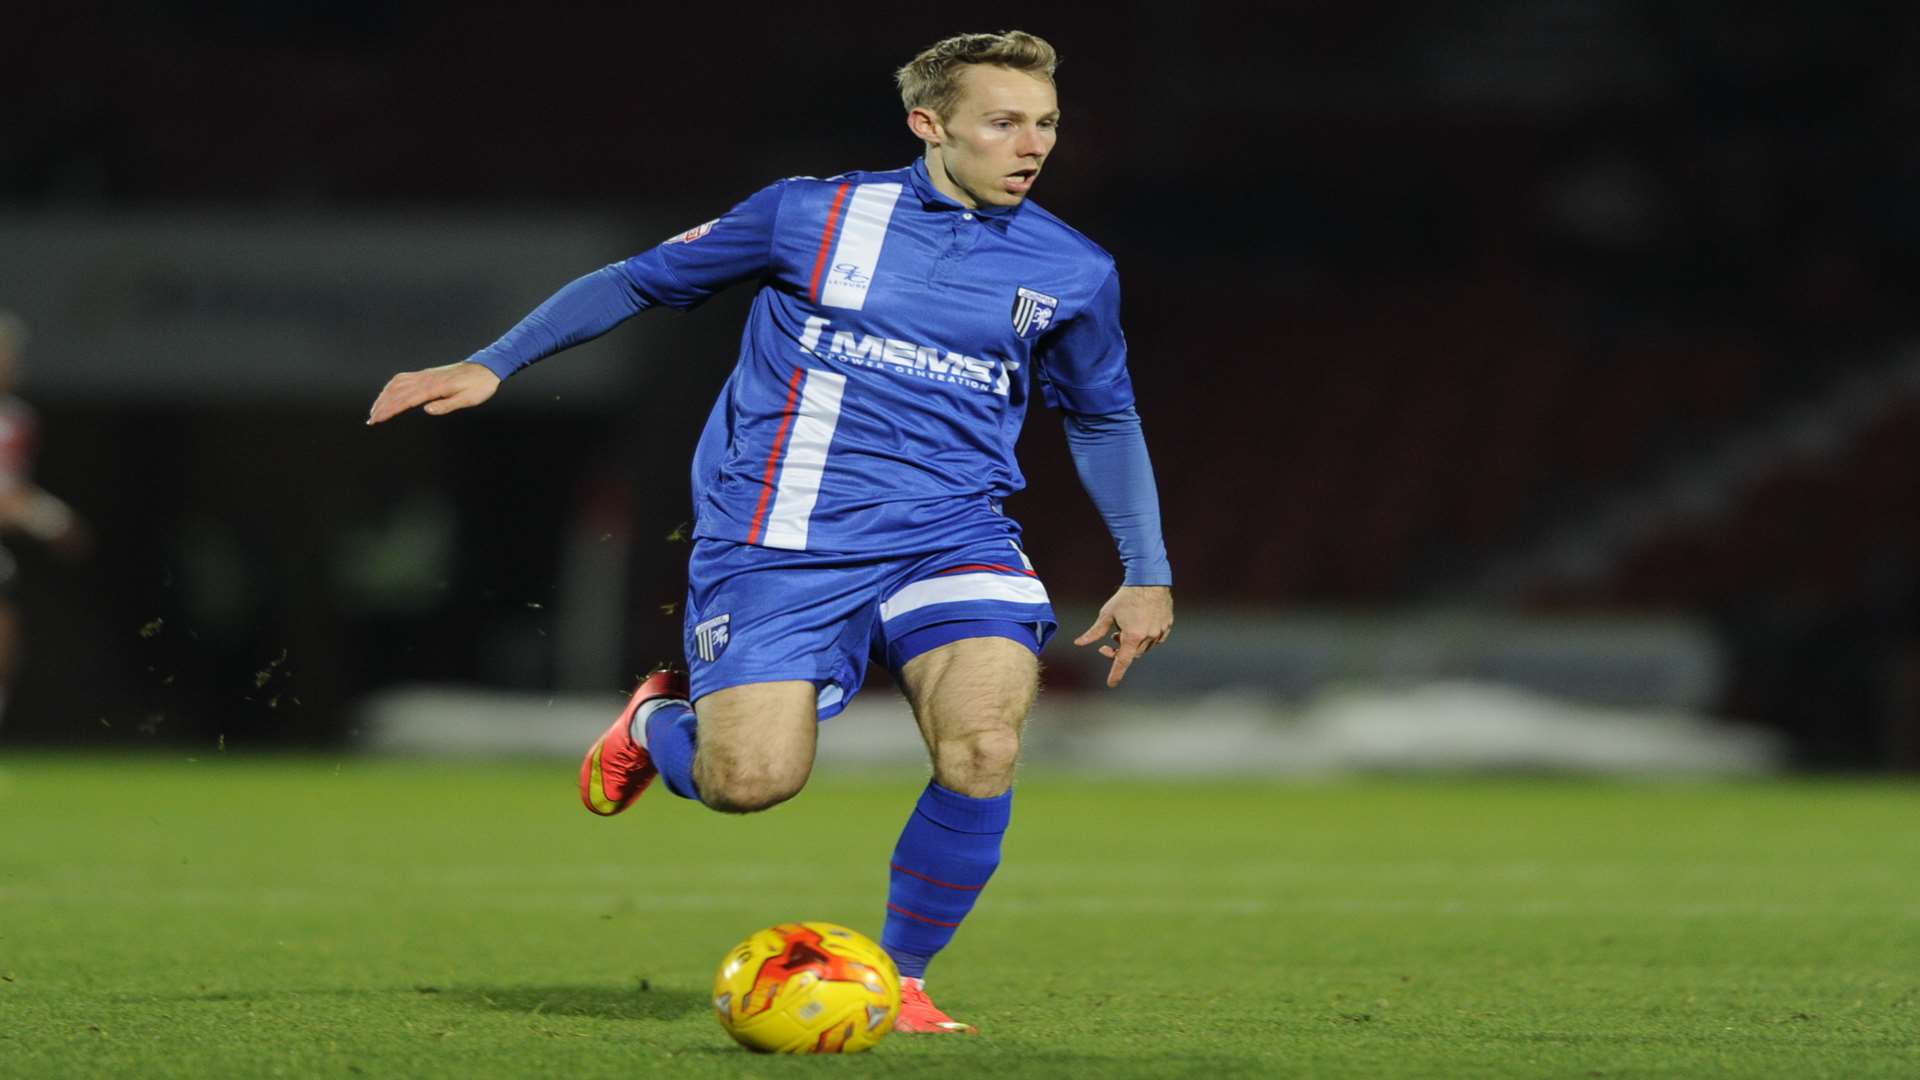 Danny Galbraith's only appearance for Gills so far was at Doncaster Picture: Barry Goodwin